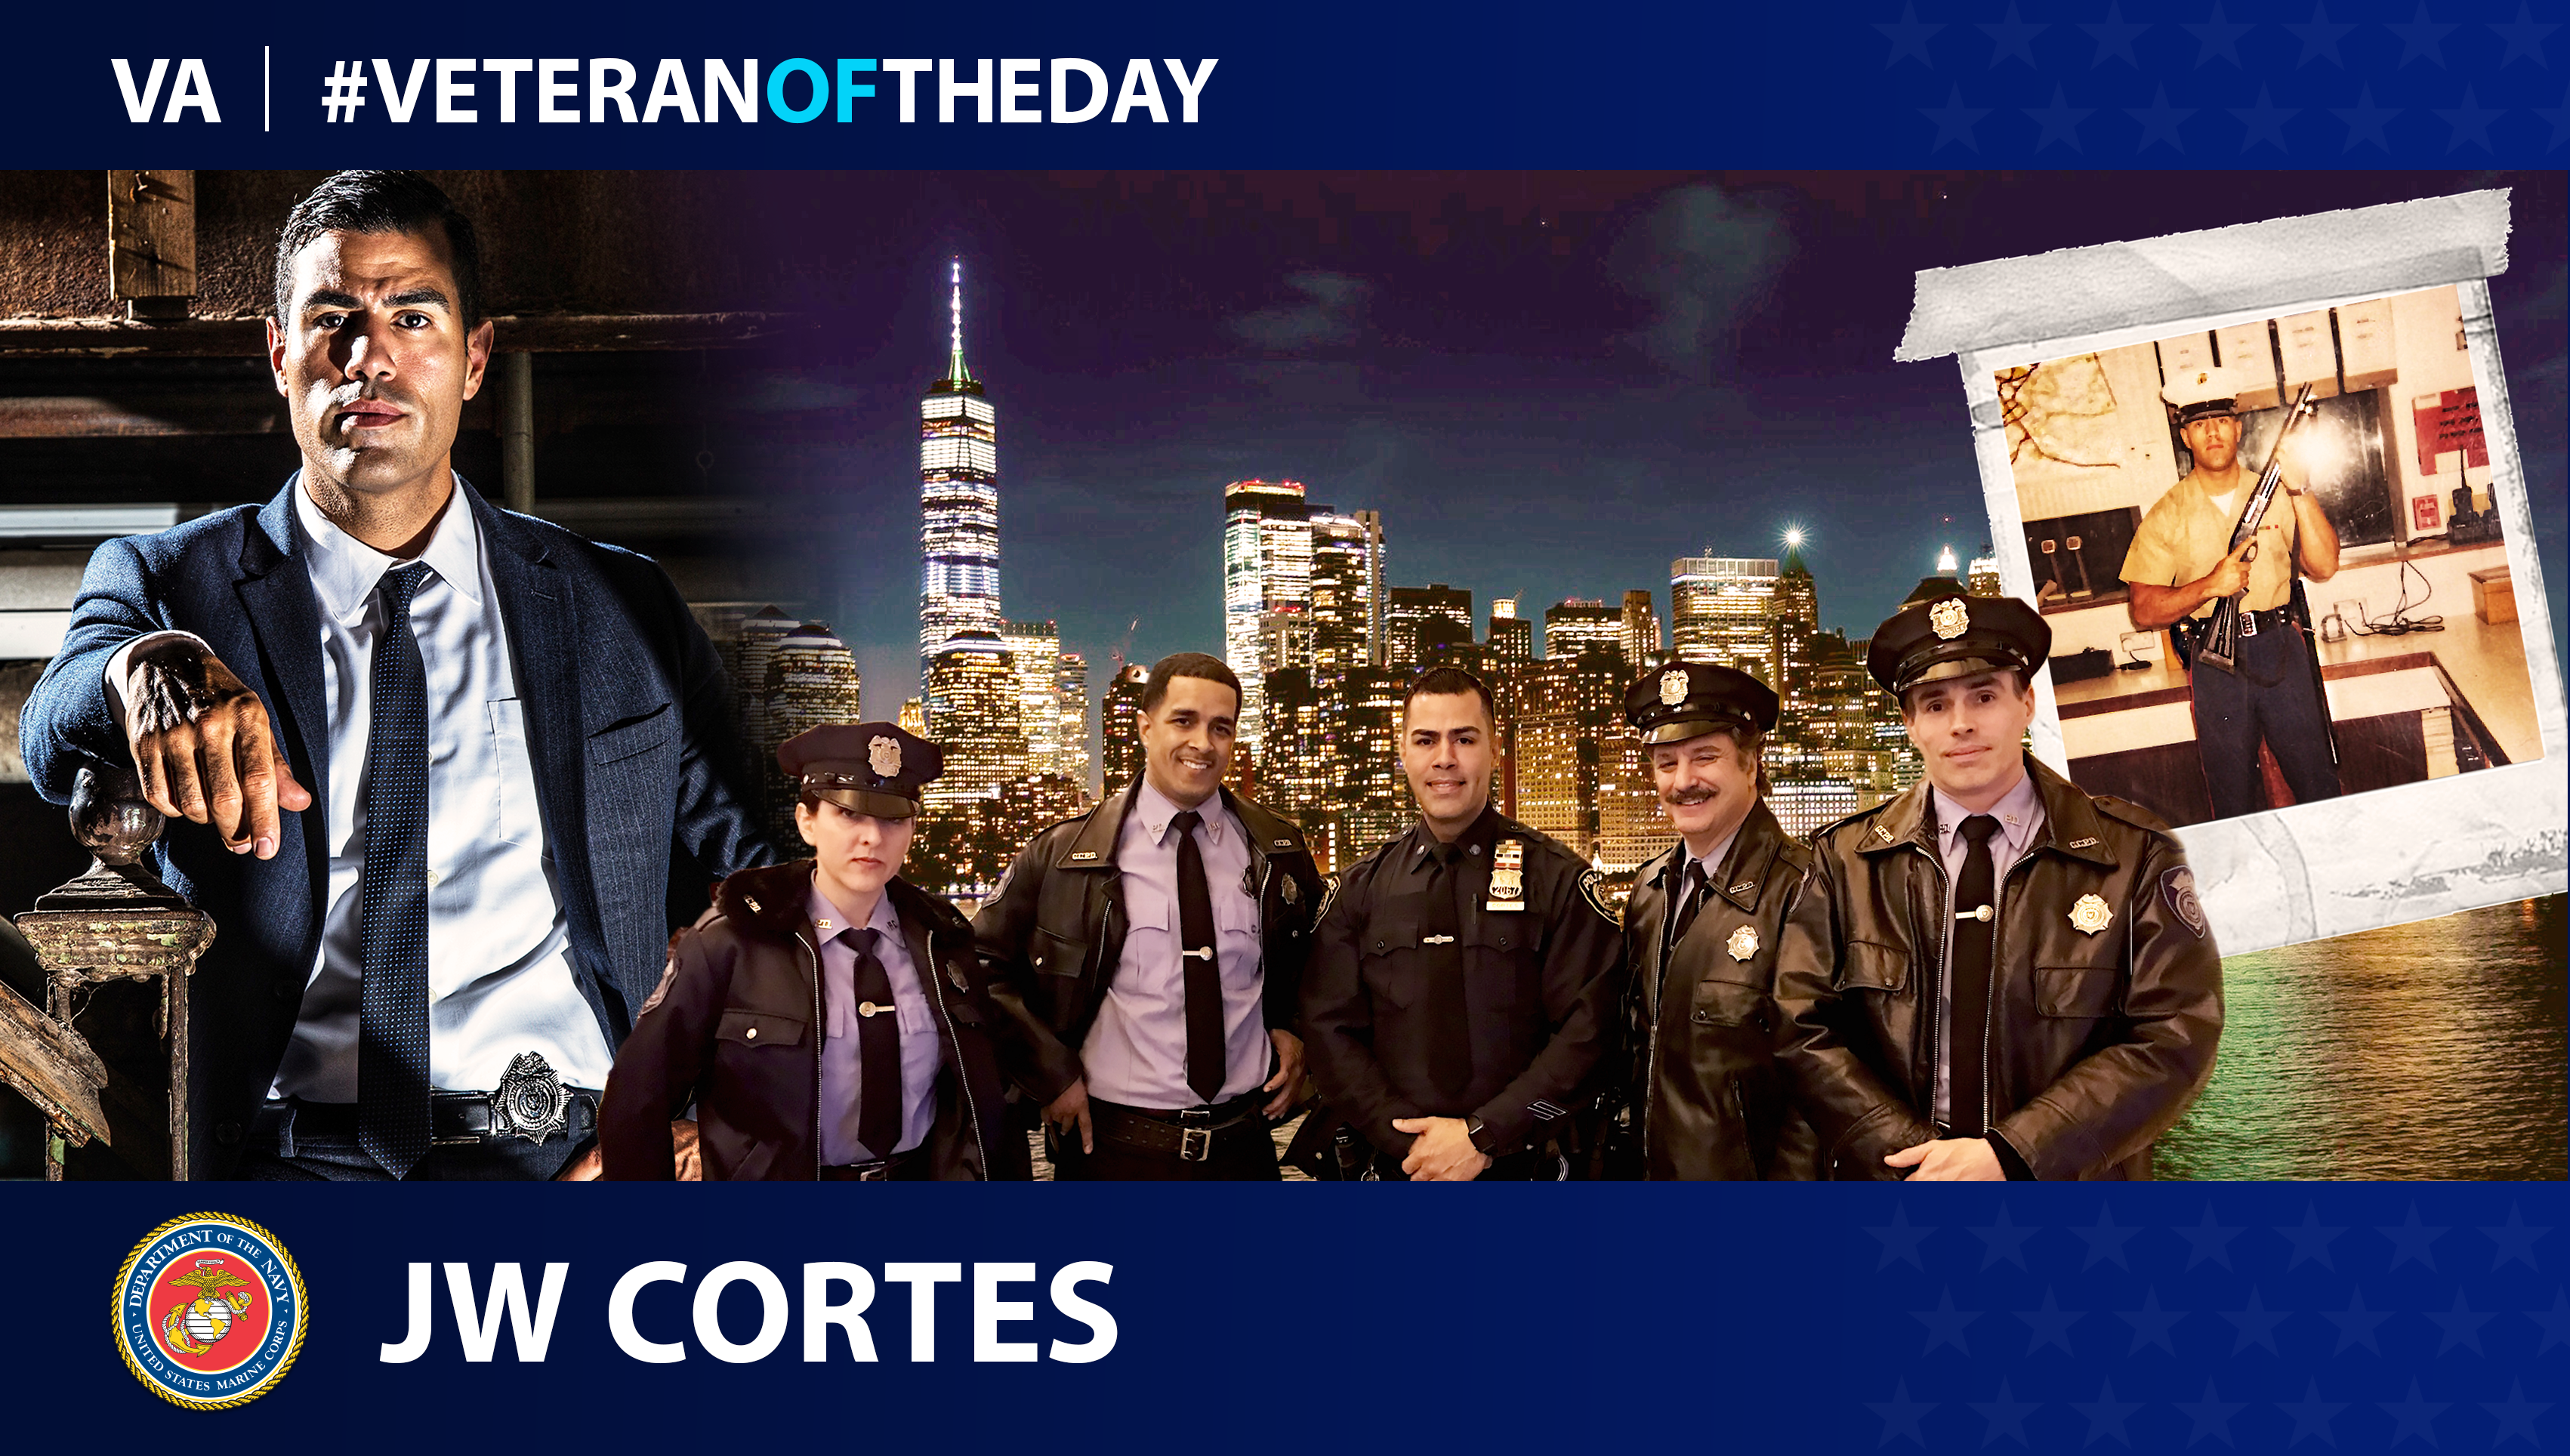 Marine Corps Veteran J.W. Cortés is today's Veteran of the Day.